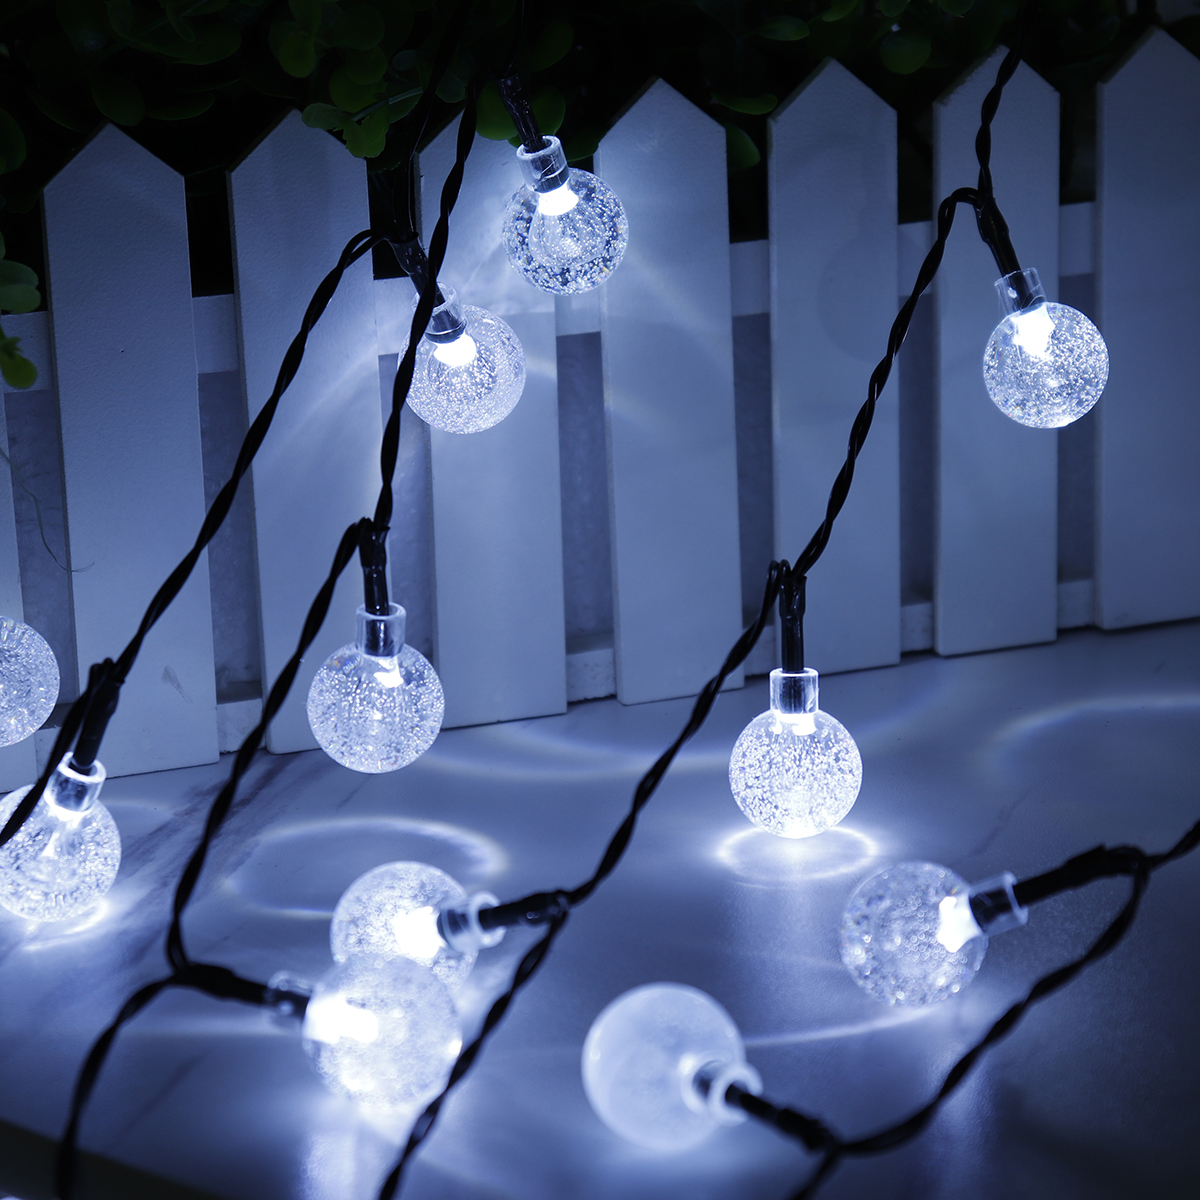 12M Waterproof 100LED String Ball Light Outdoor Garden Party Wedding Decor Lamp+Remote Control